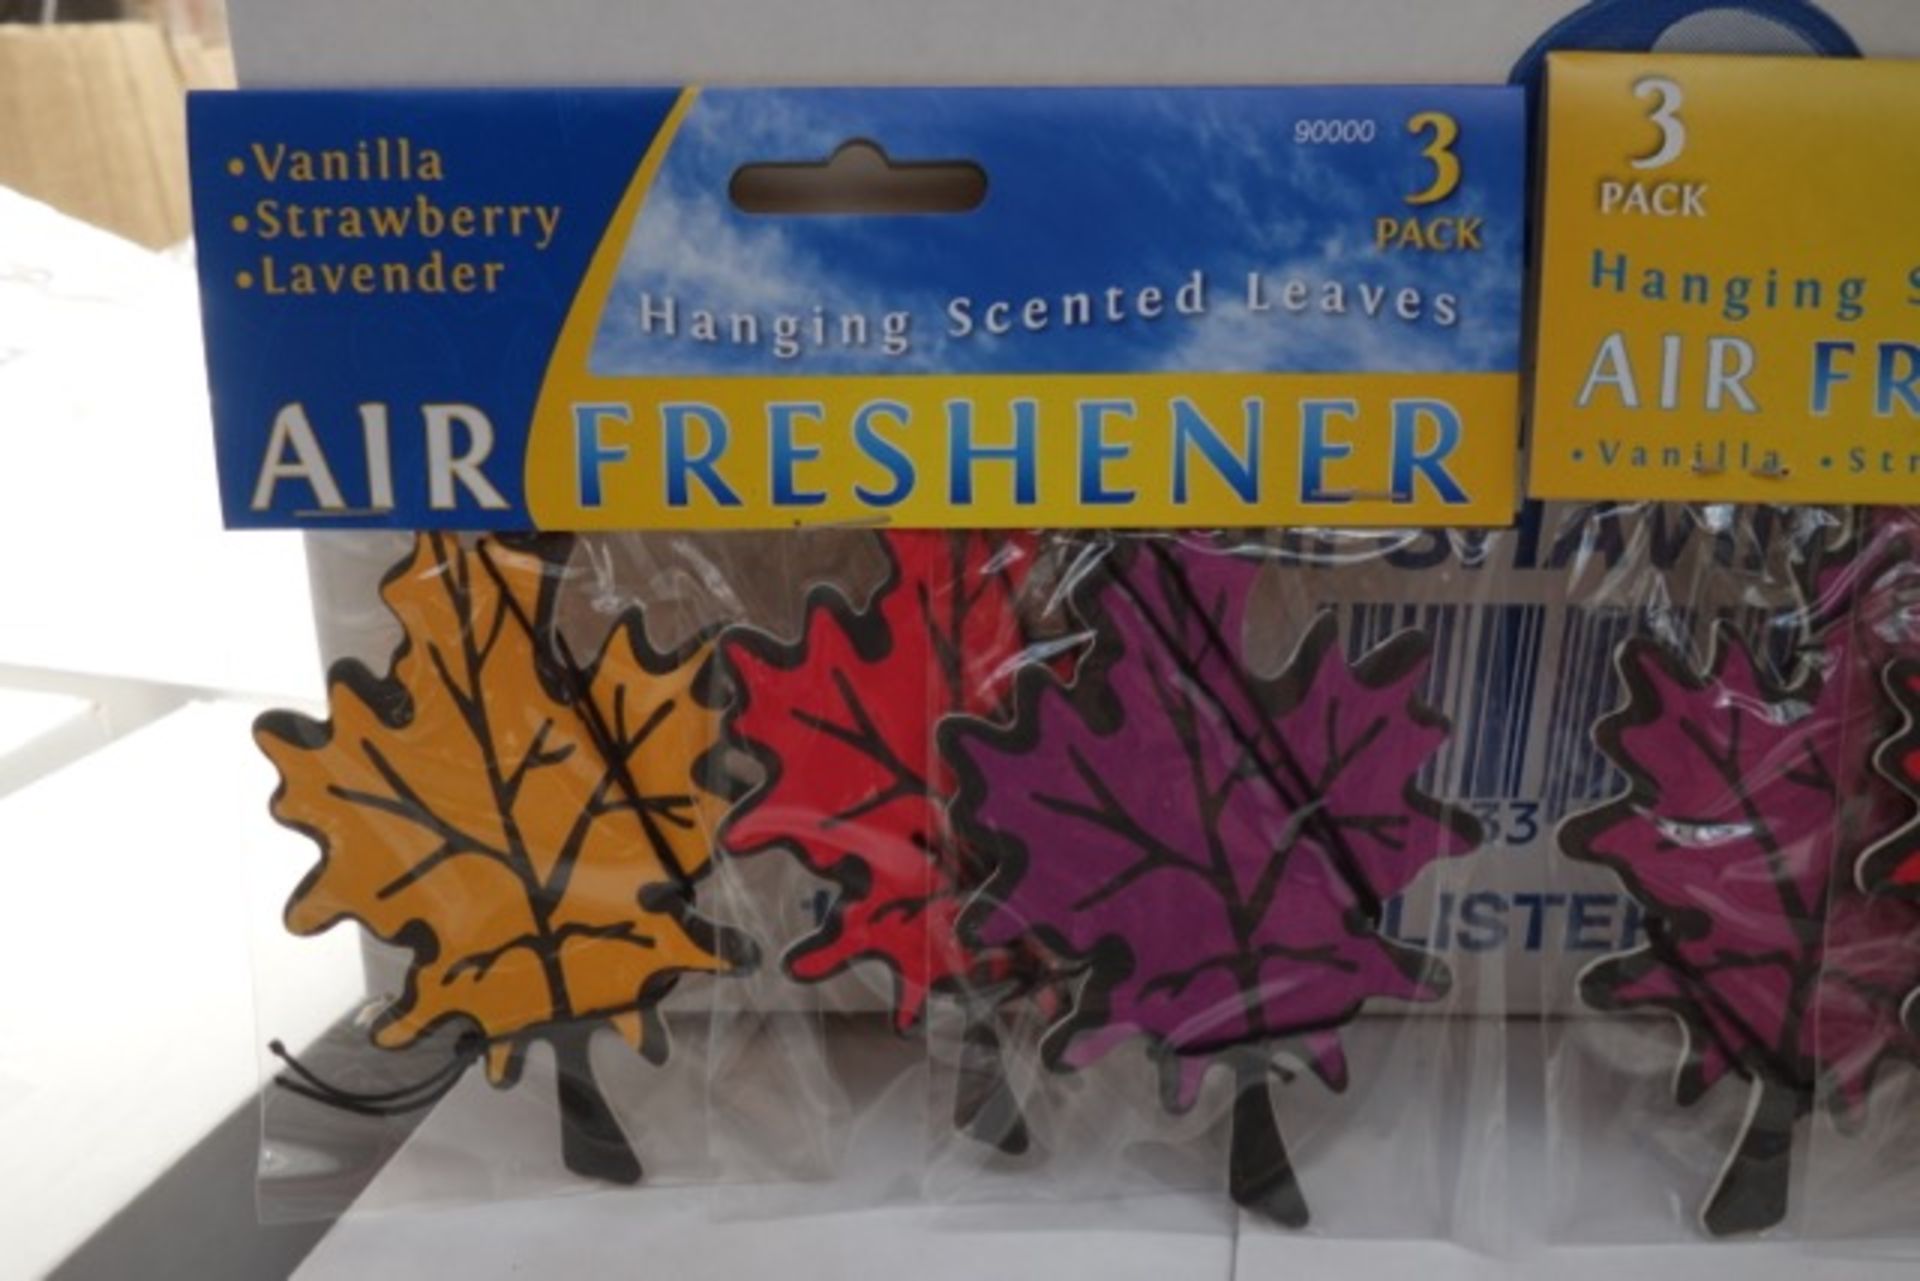 160 x 3 Pack Hanging Air Freshners. Vanilla, Strawberry & Lavender. RRP £2.99 per pack, giving - Image 2 of 3